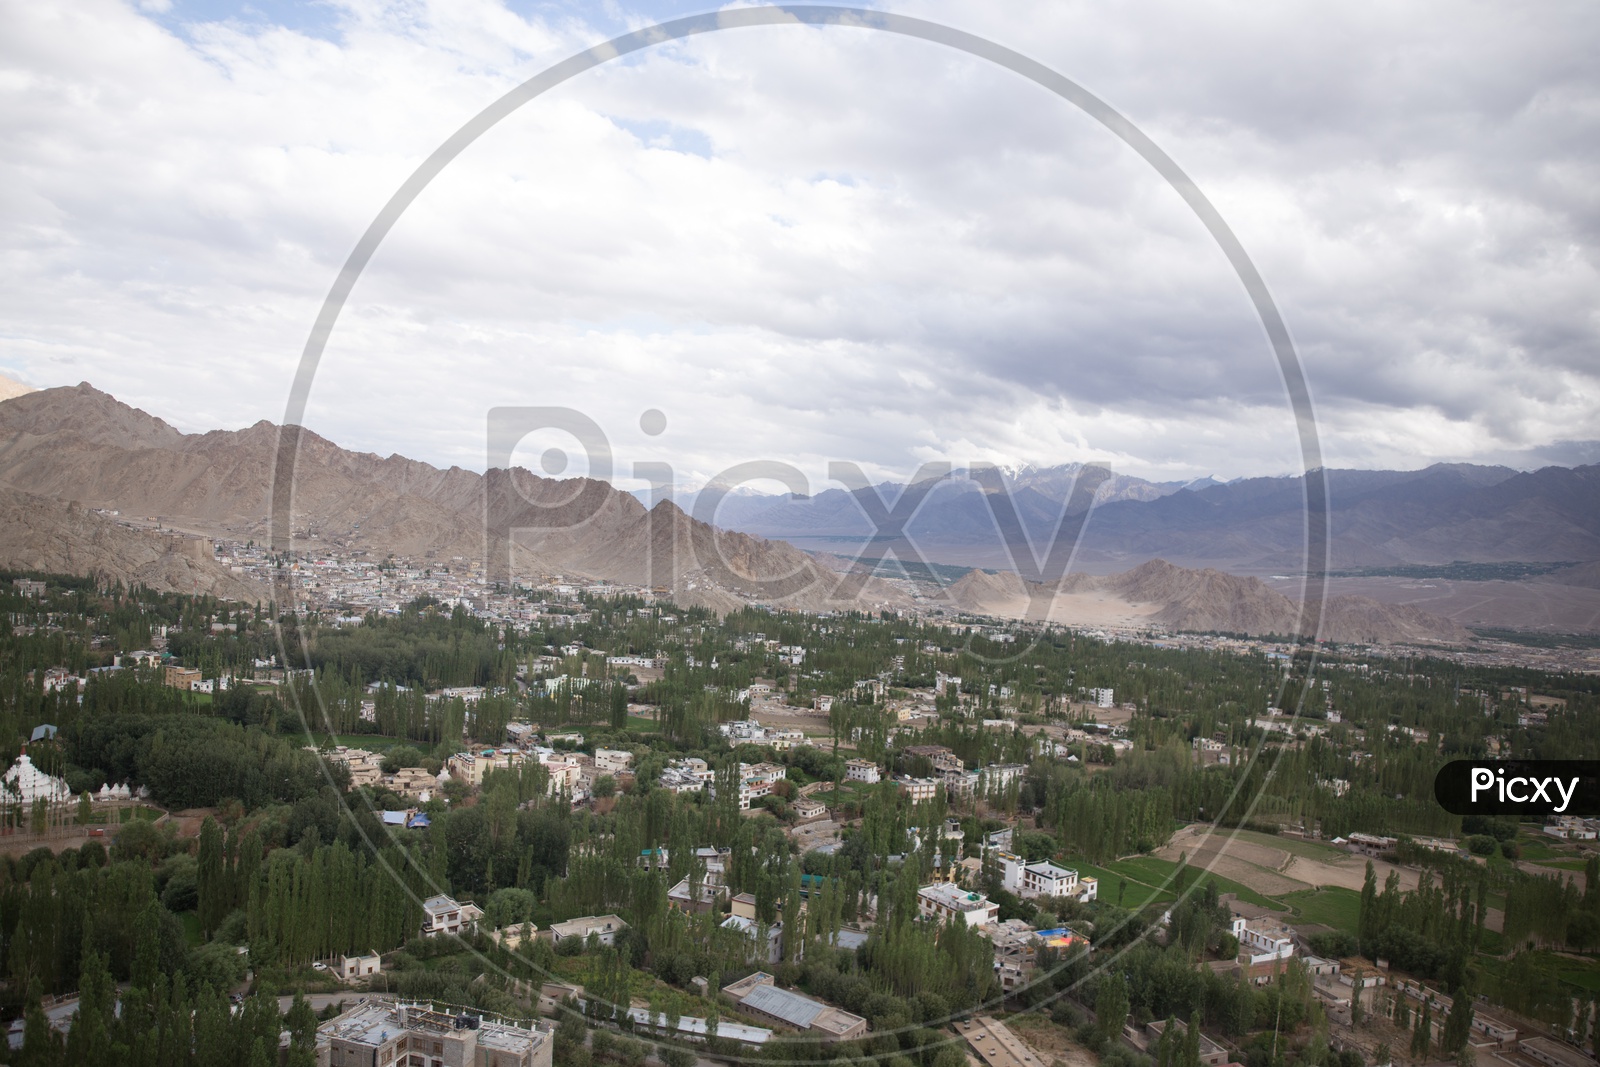 Beautiful Landscape of Snow Capped Mountains of Leh with houses in the foreground